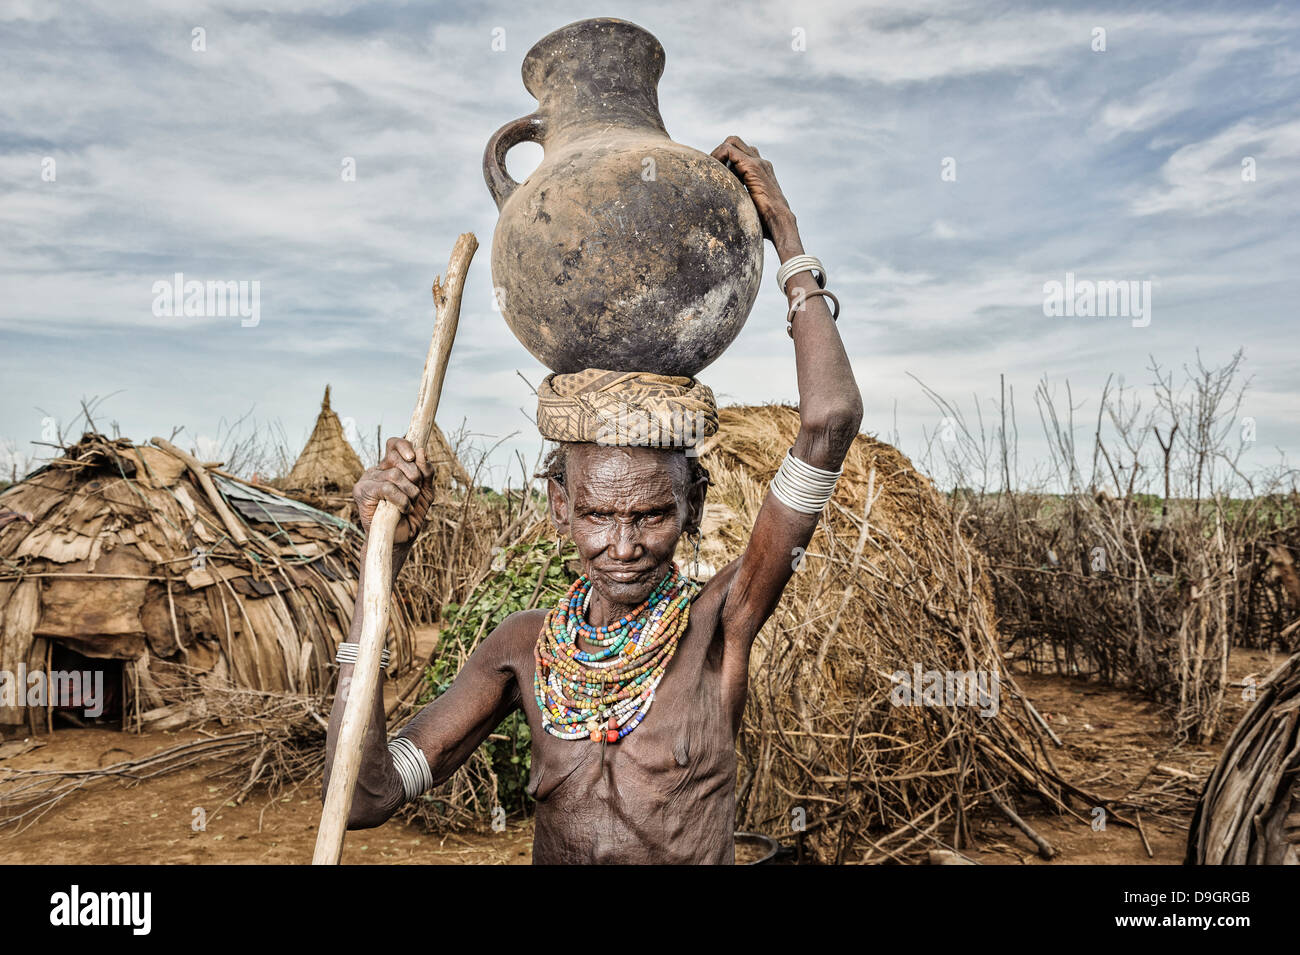 Old Dassanech woman carrying a big pot over her head near Omo river, Omorate, Ethiopia Stock Photo